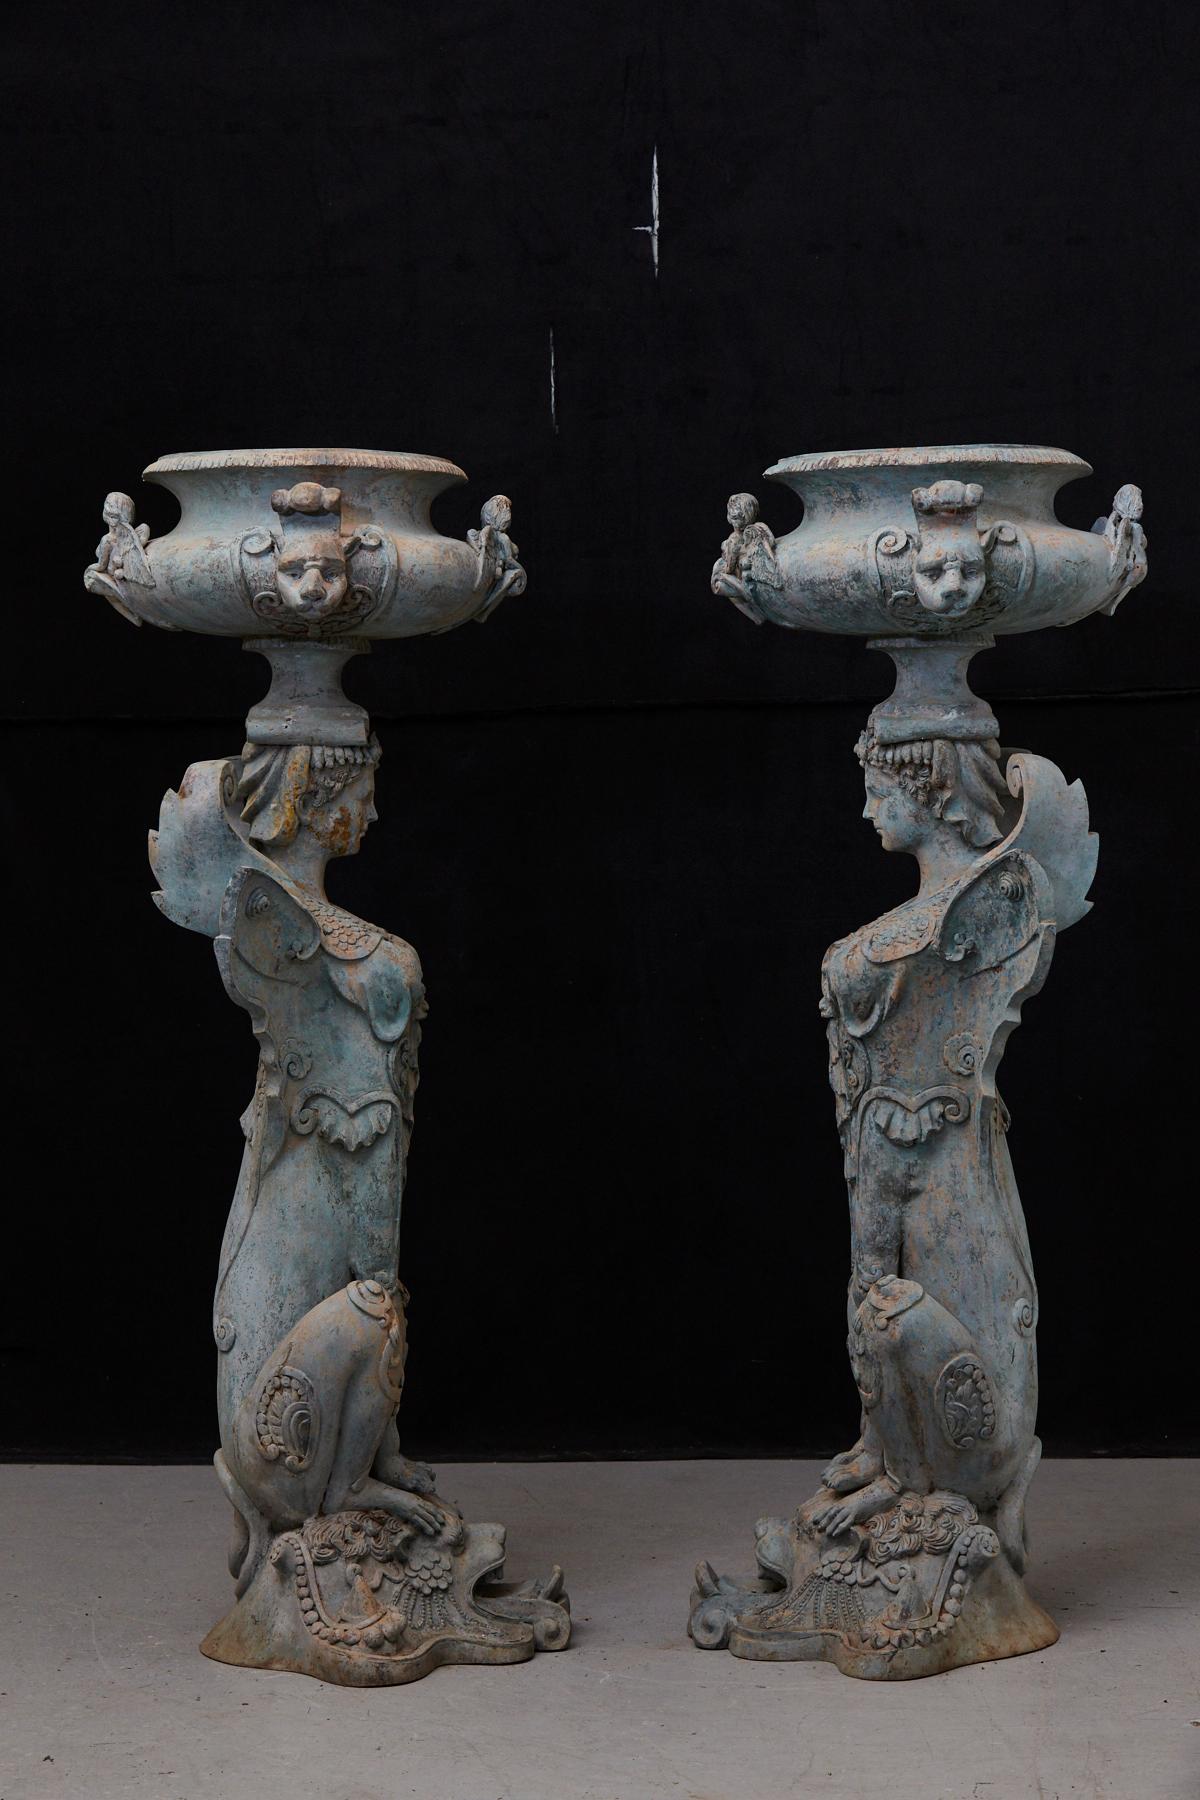 20th Century Pair of Tall Patinated Cast Iron Planters Showing Mythical Creatures / Chimeres